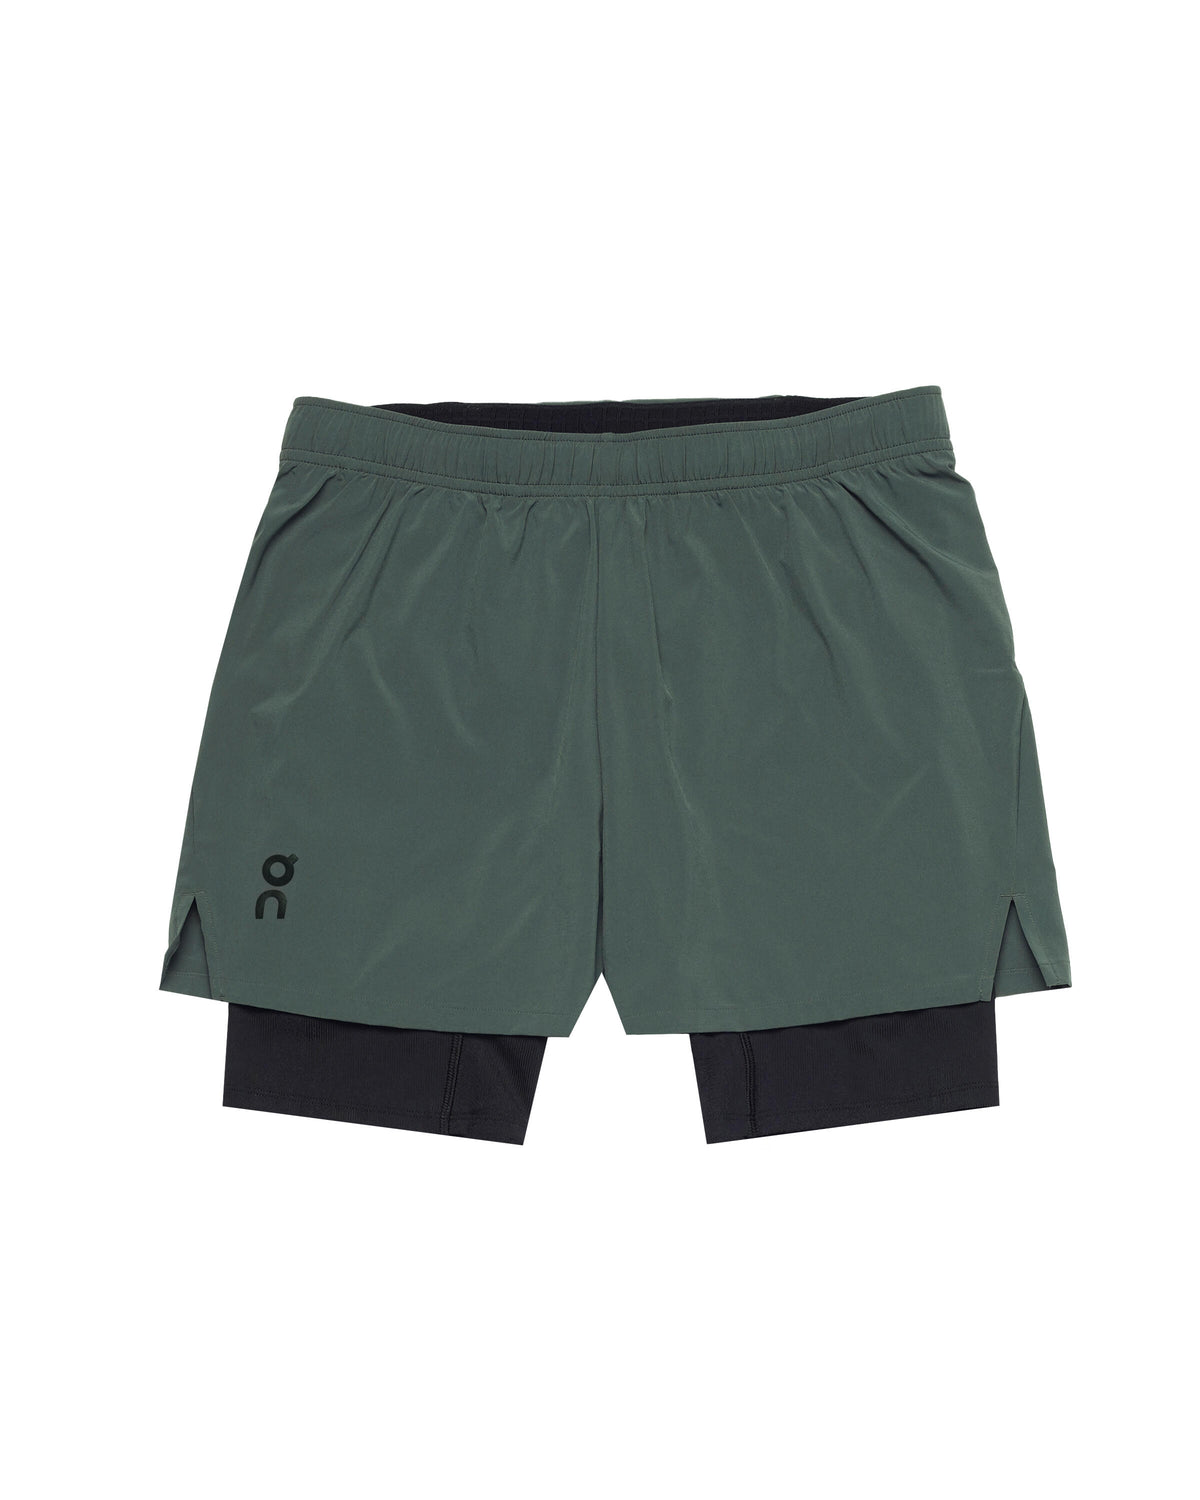 ON Running Pace Shorts